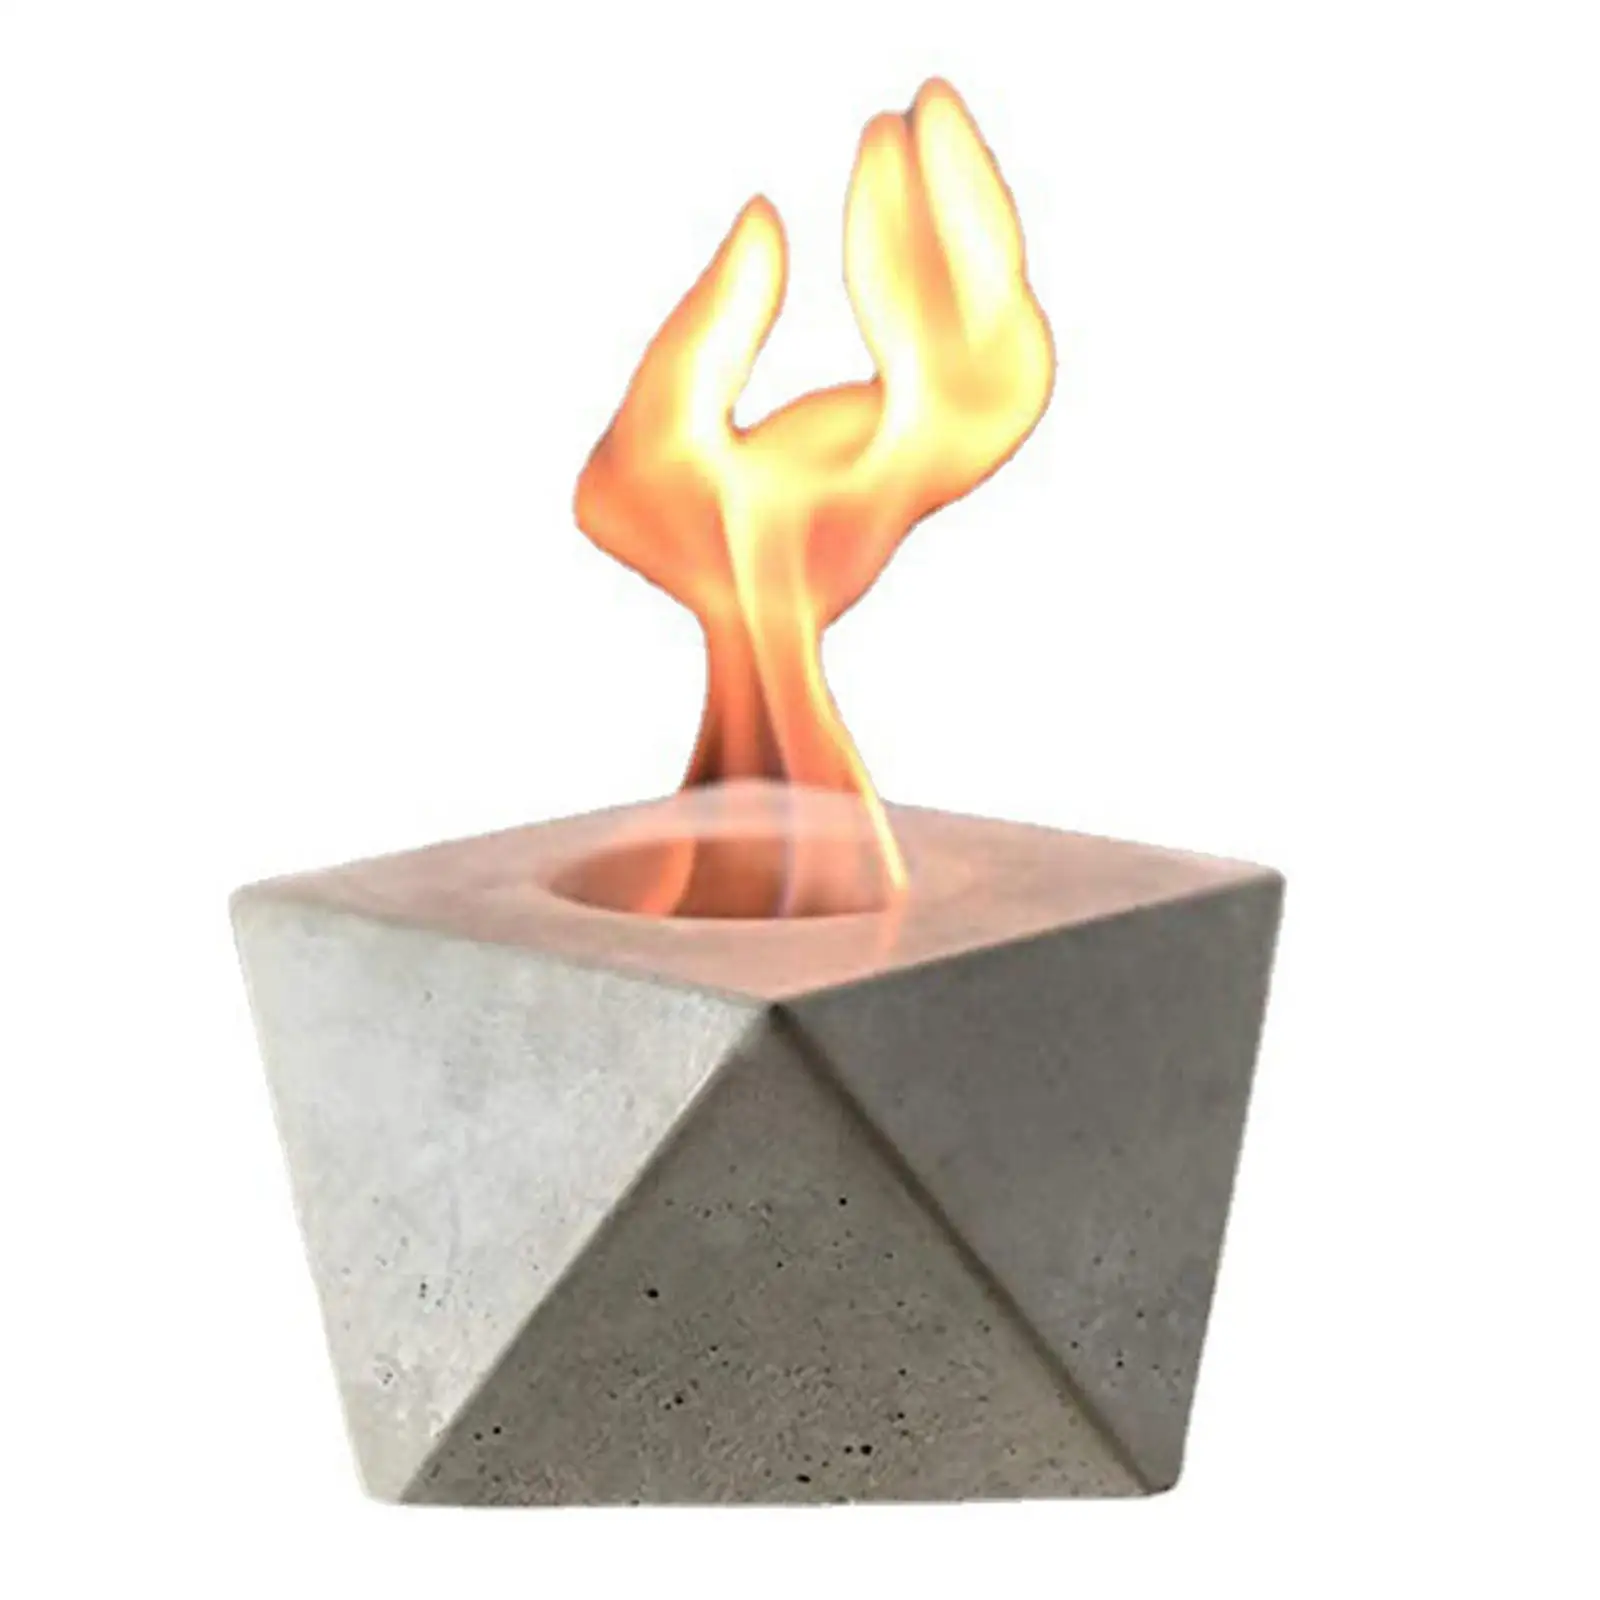 Table Top Firepit Small Lightweight Portable Gray Fireplace Compact Decorative Flame Bowl for Patio Balcony Home Garden Outdoor